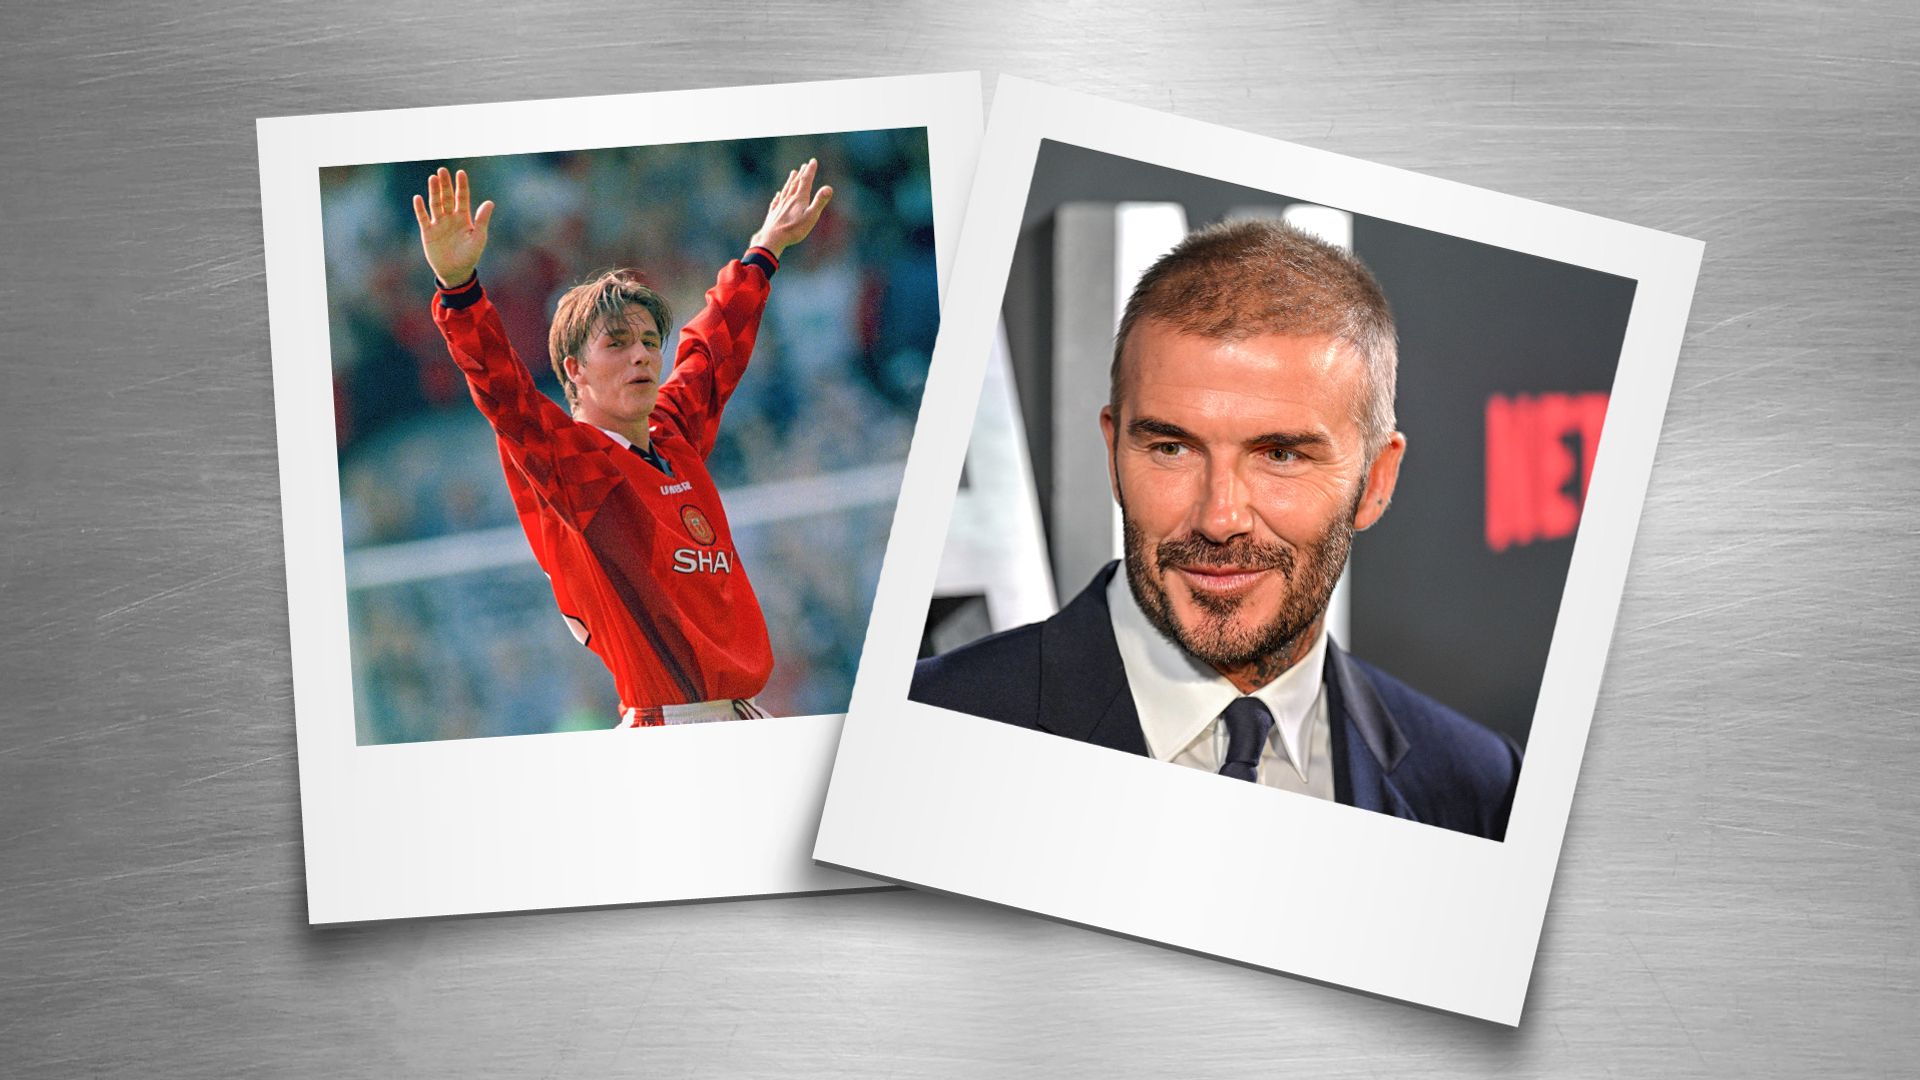 Audacious shots on rise after Beckham documentary